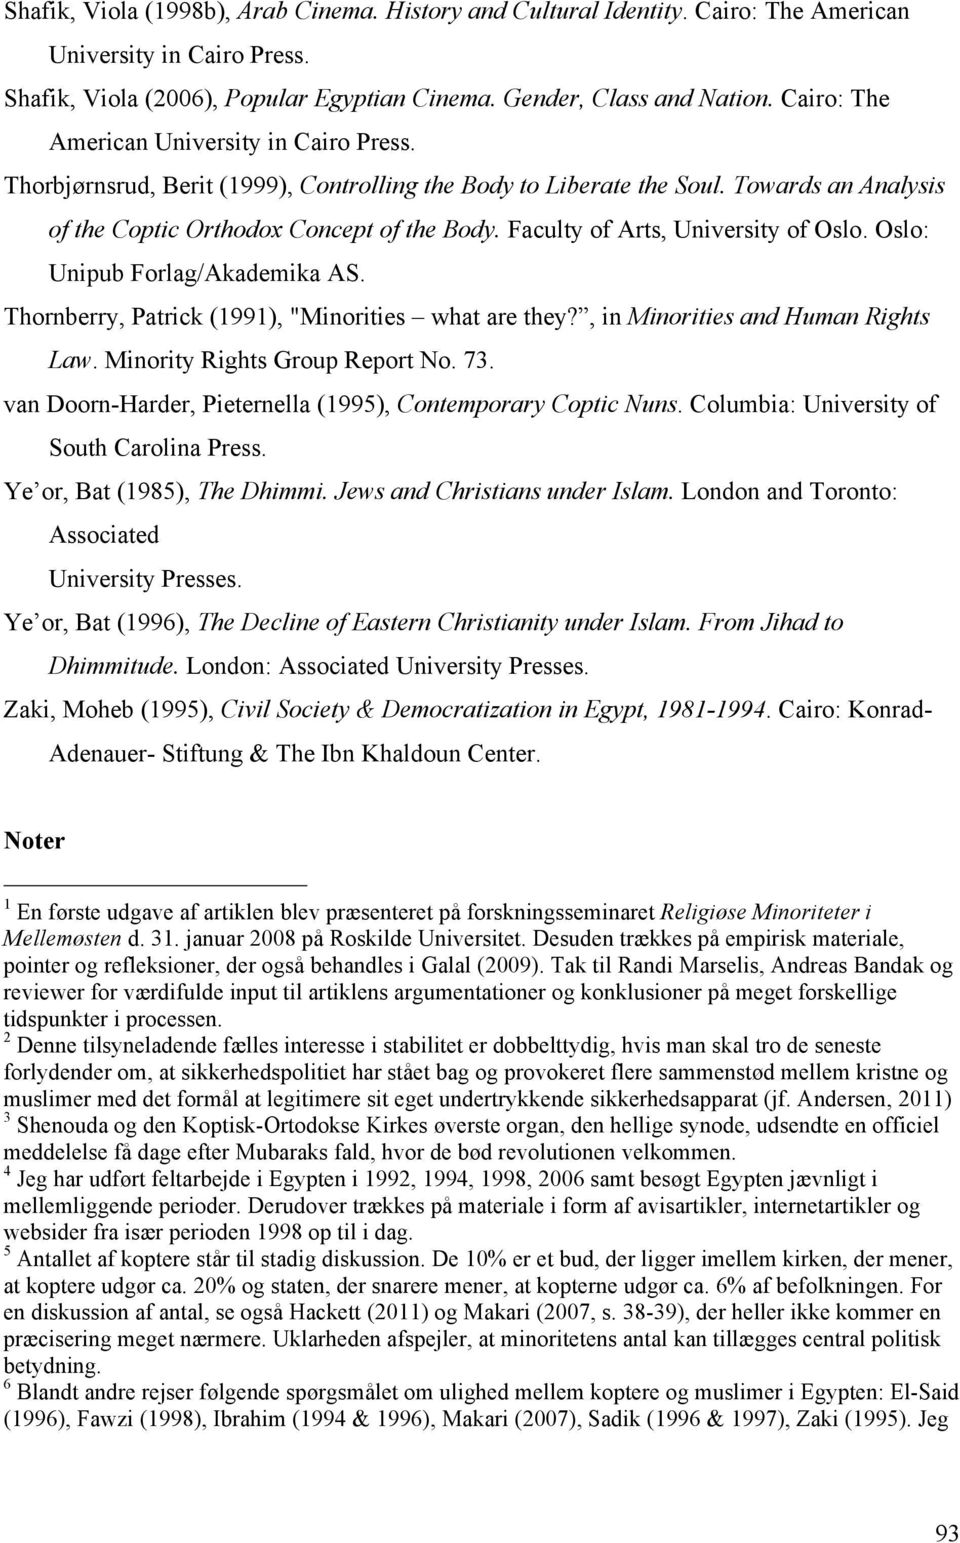 Faculty of Arts, University of Oslo. Oslo: Unipub Forlag/Akademika AS. Thornberry, Patrick (1991), "Minorities what are they?, in Minorities and Human Rights Law. Minority Rights Group Report No. 73.